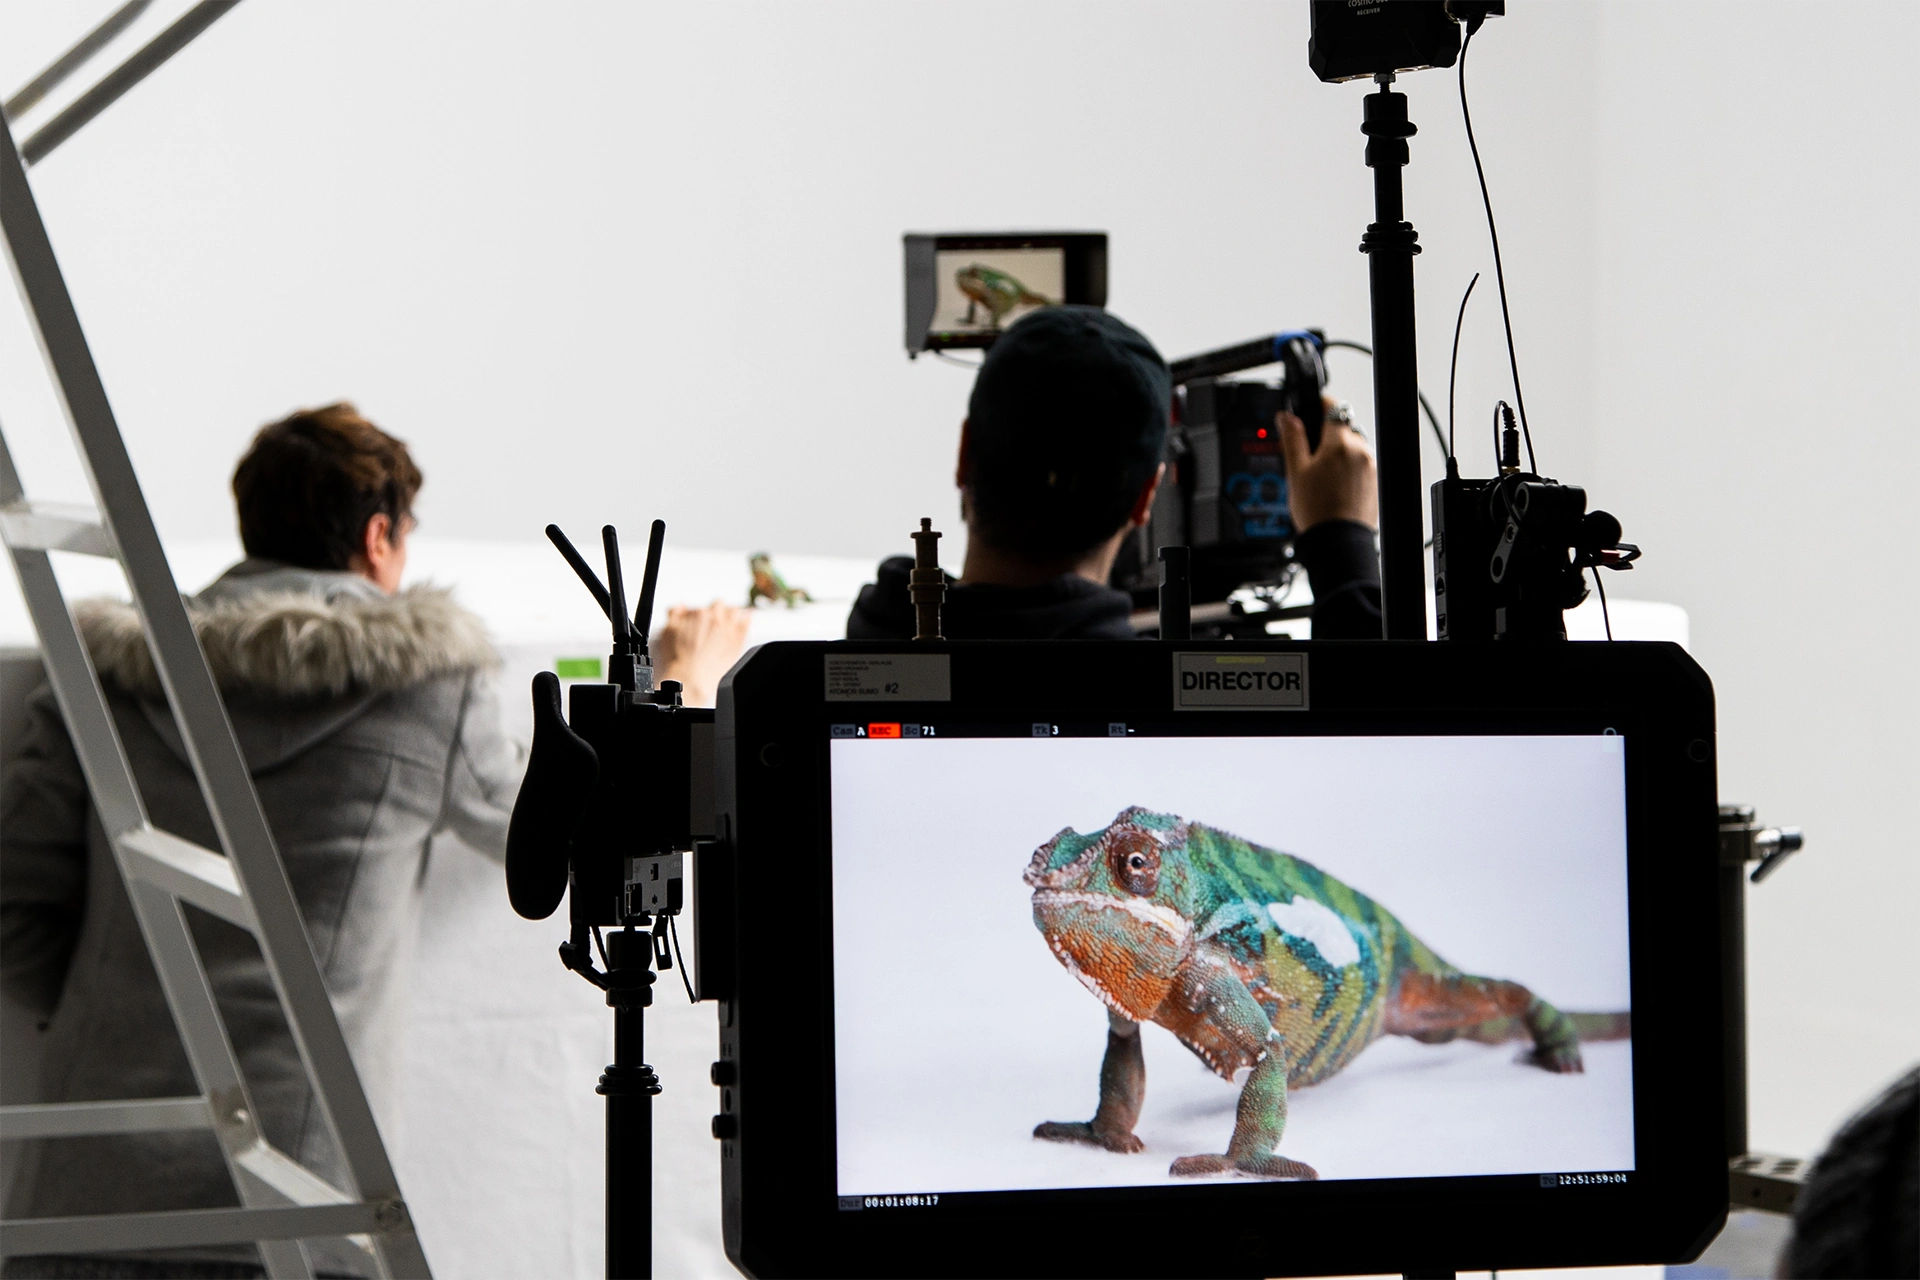 A picture shows a chameleon behind the camera on a Friedrichstadtpalast shoot for the Grand Show 